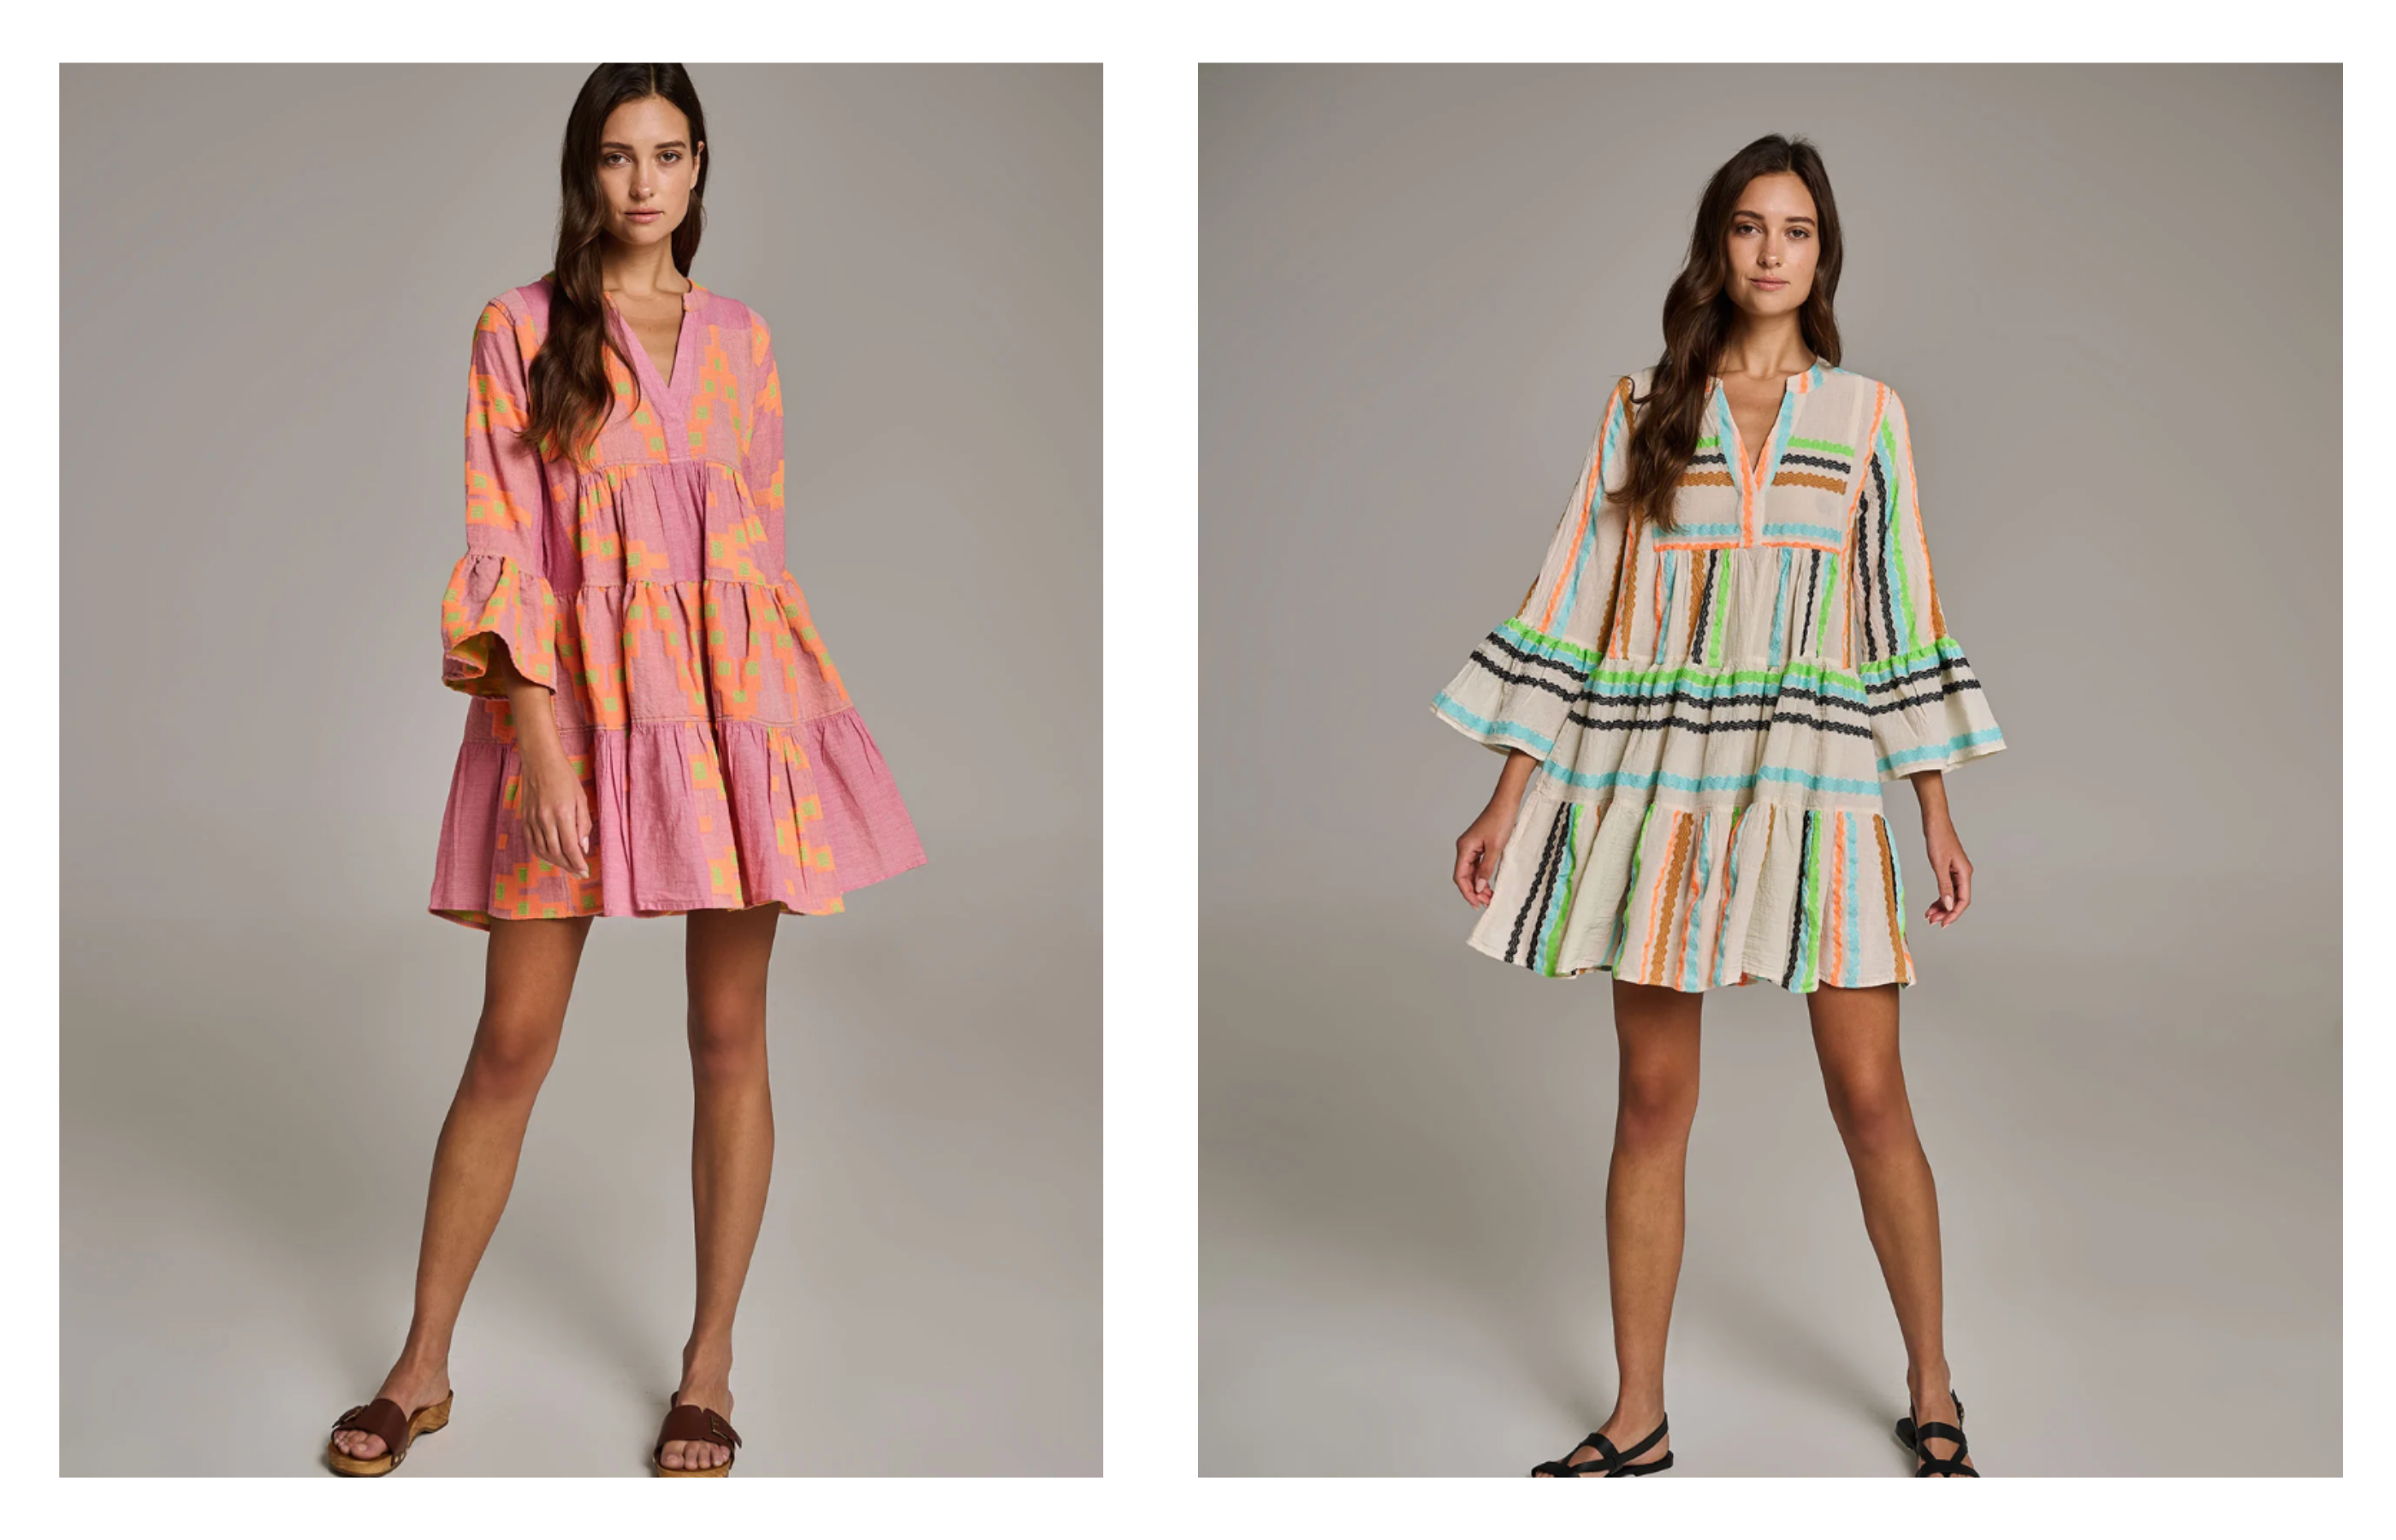 Models wearing colourful cotton dresses by Devotion Twins